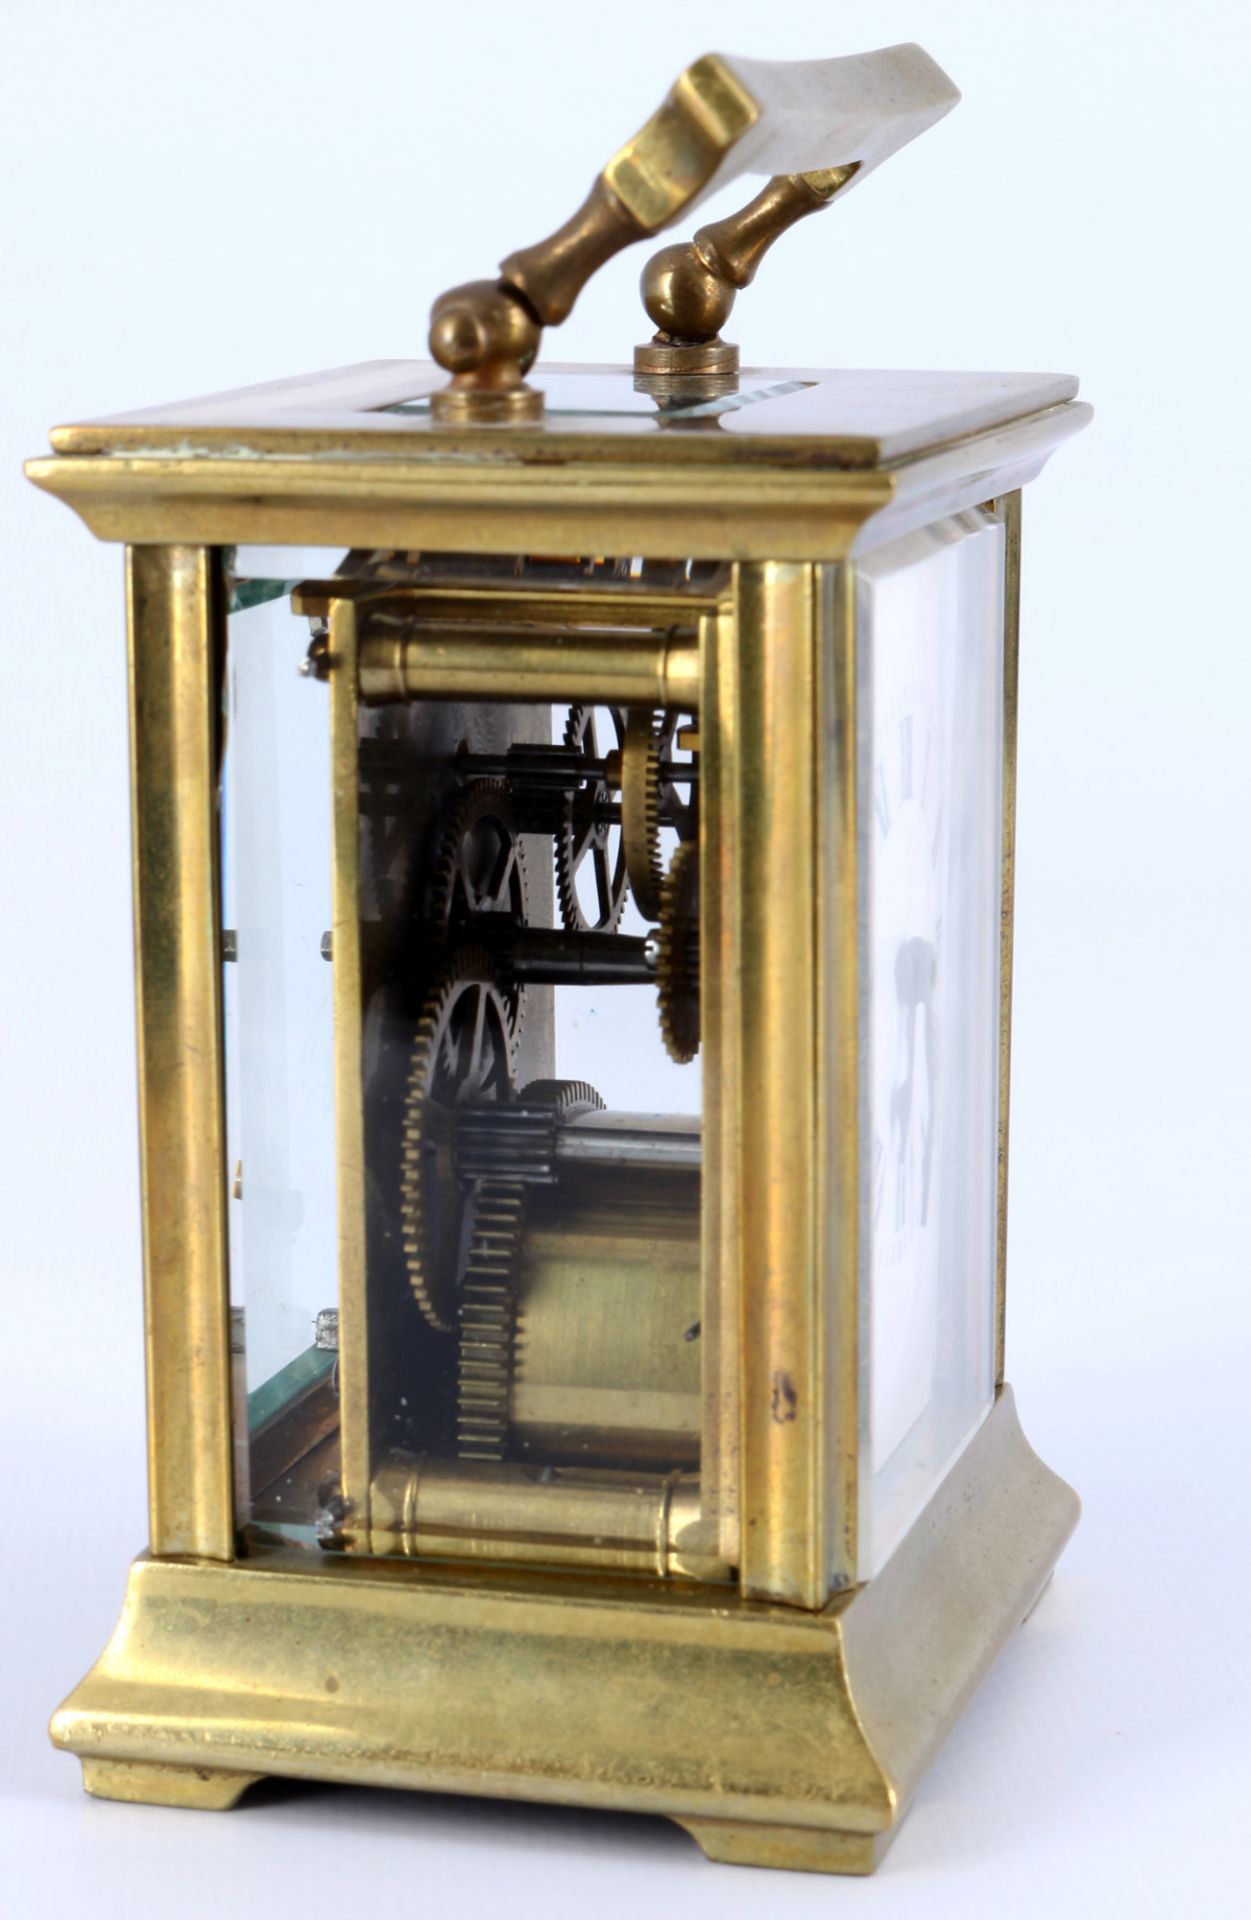 Carriage clock, France around 1900, - Image 3 of 8